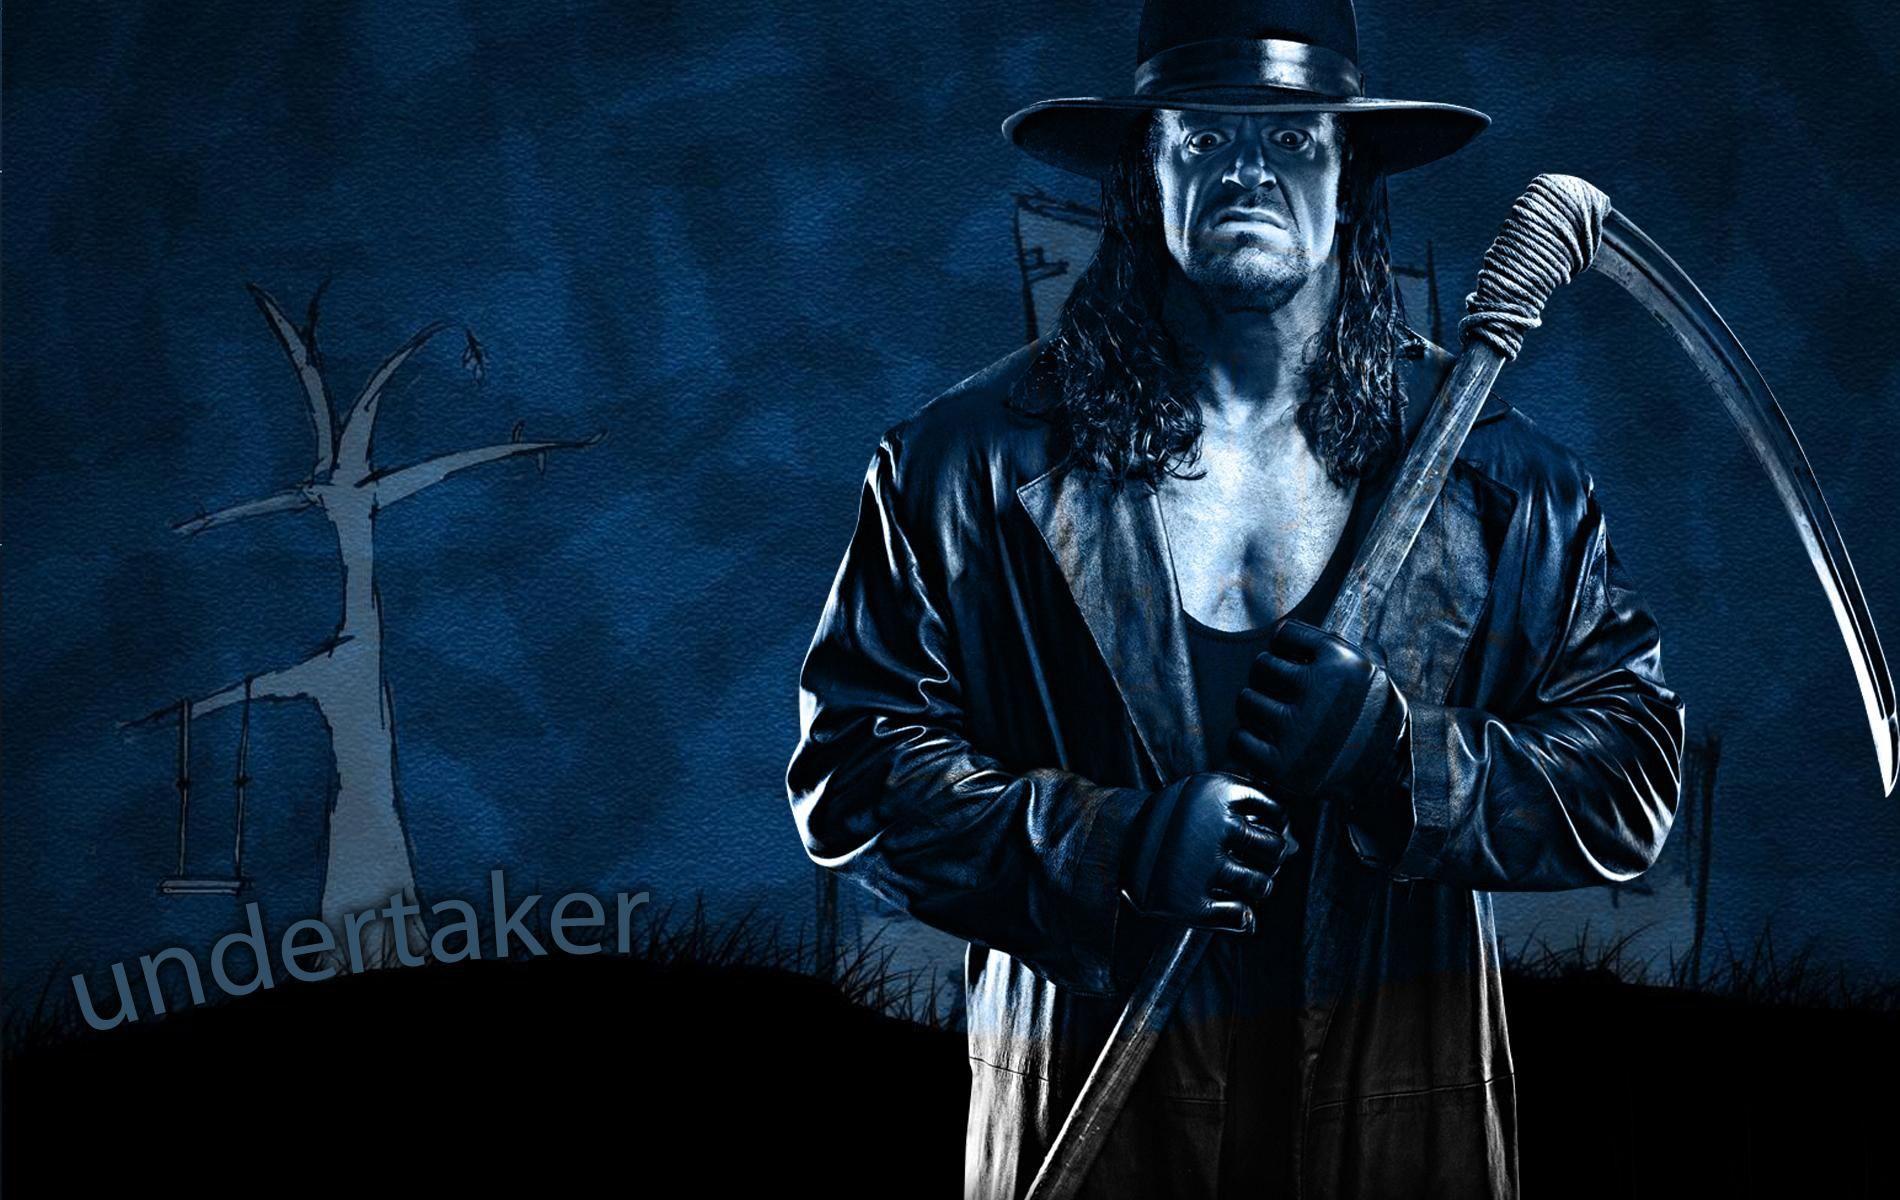 HD wallpaper The Undertaker Angry Face The Undertaker digital wallpaper  WWE  Wallpaper Flare